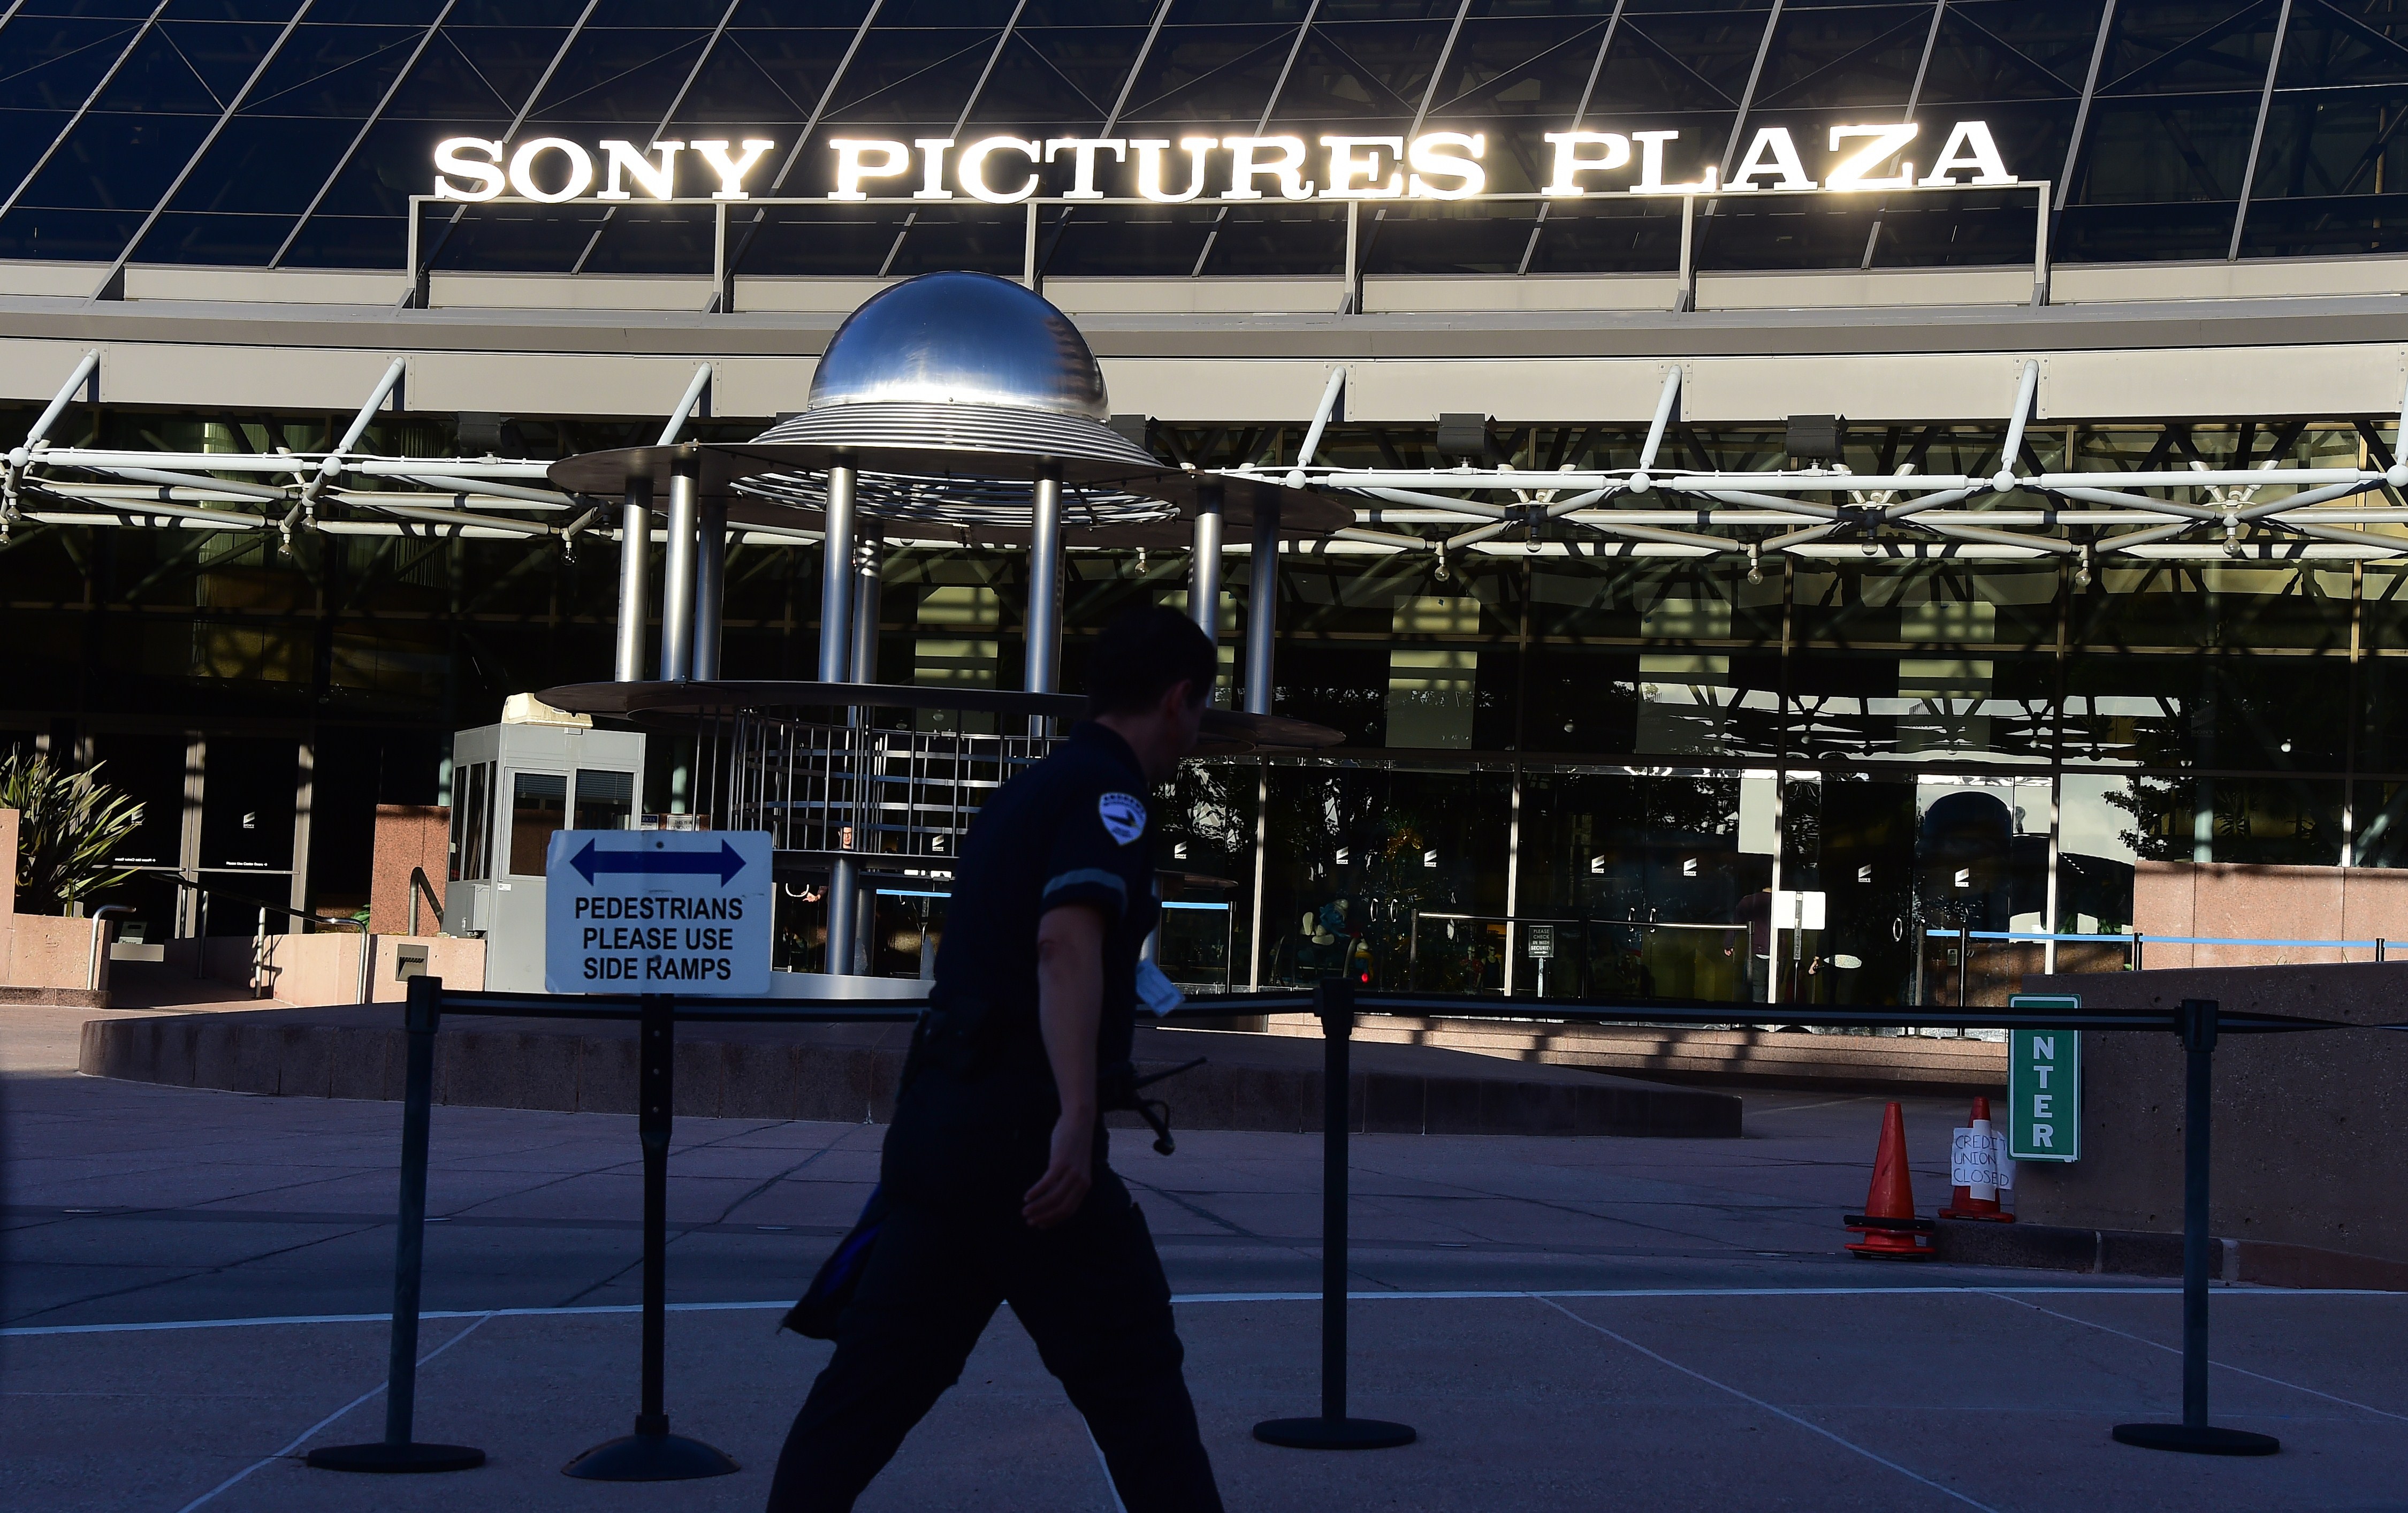 getty-sony-pictures-plaza.jpg